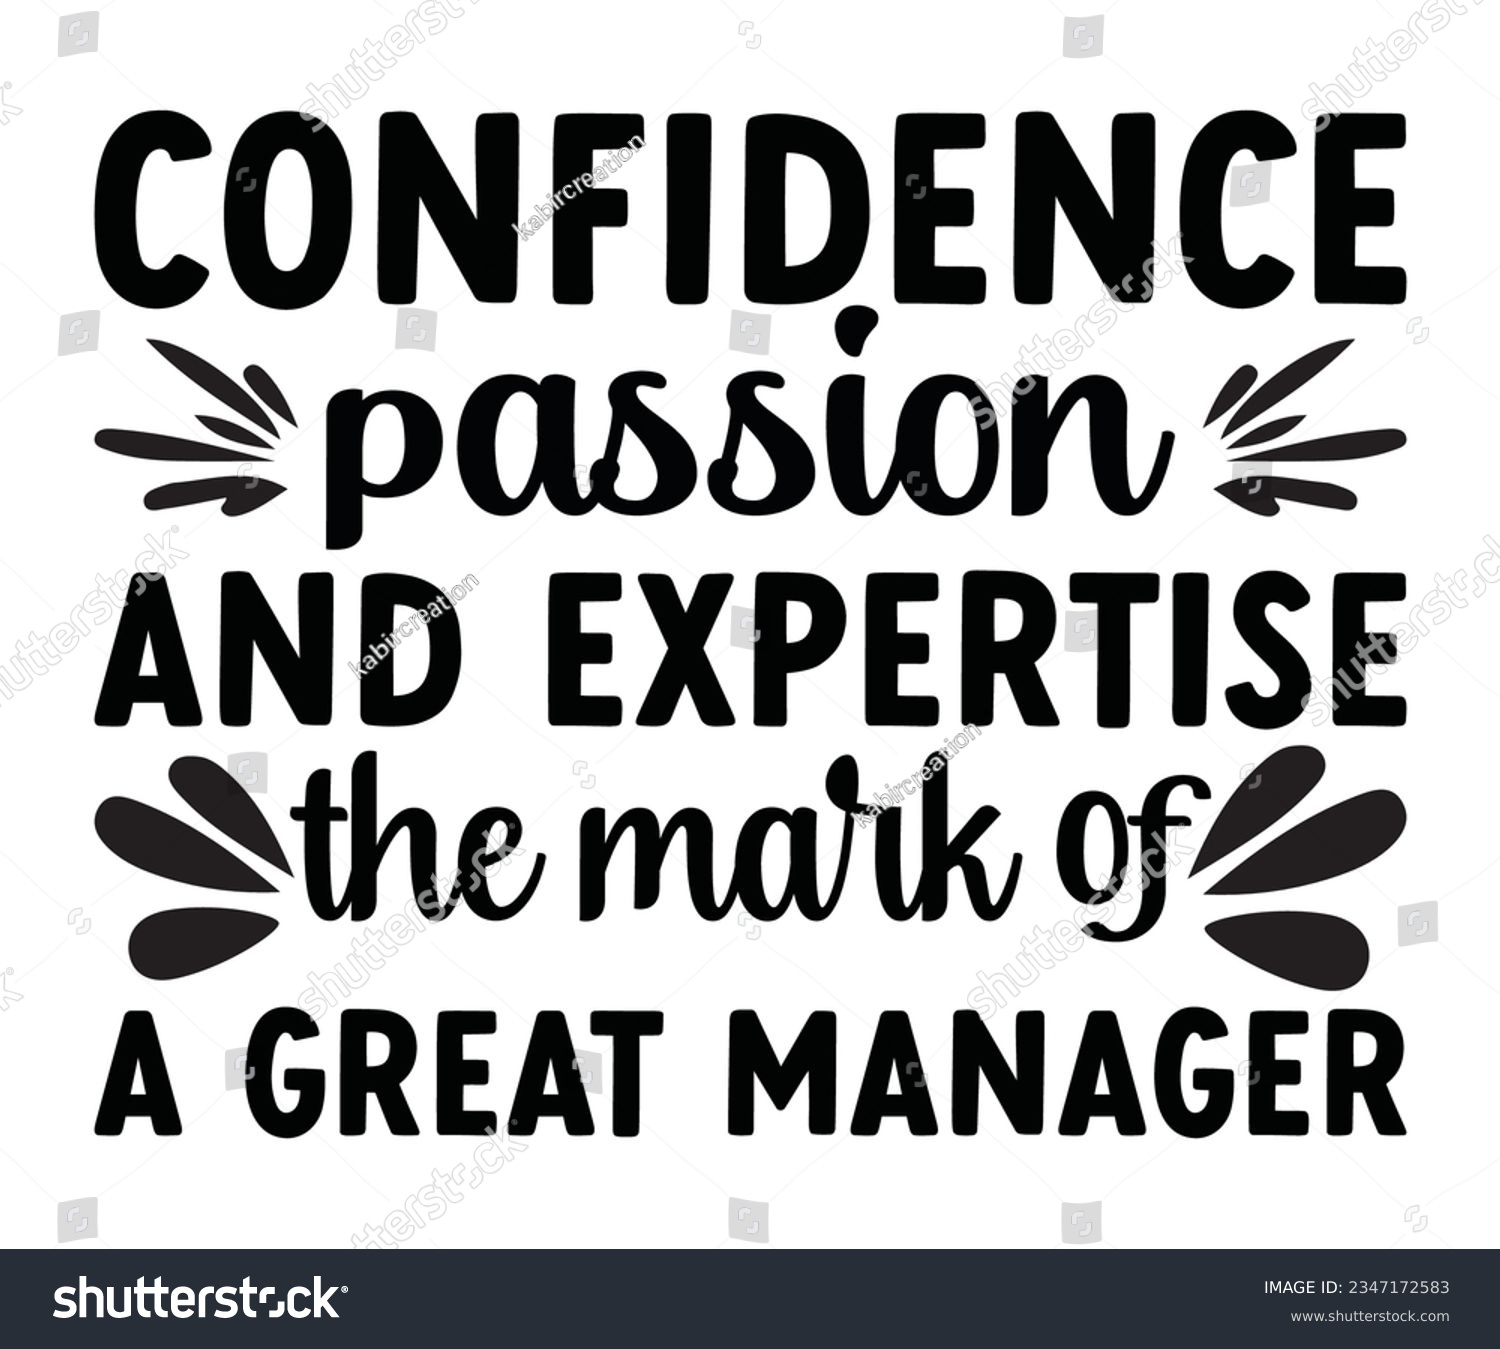 SVG of Confidence, and expertise - the mark of a great manager svg Confidence svg , passion svg, great manager svg svg